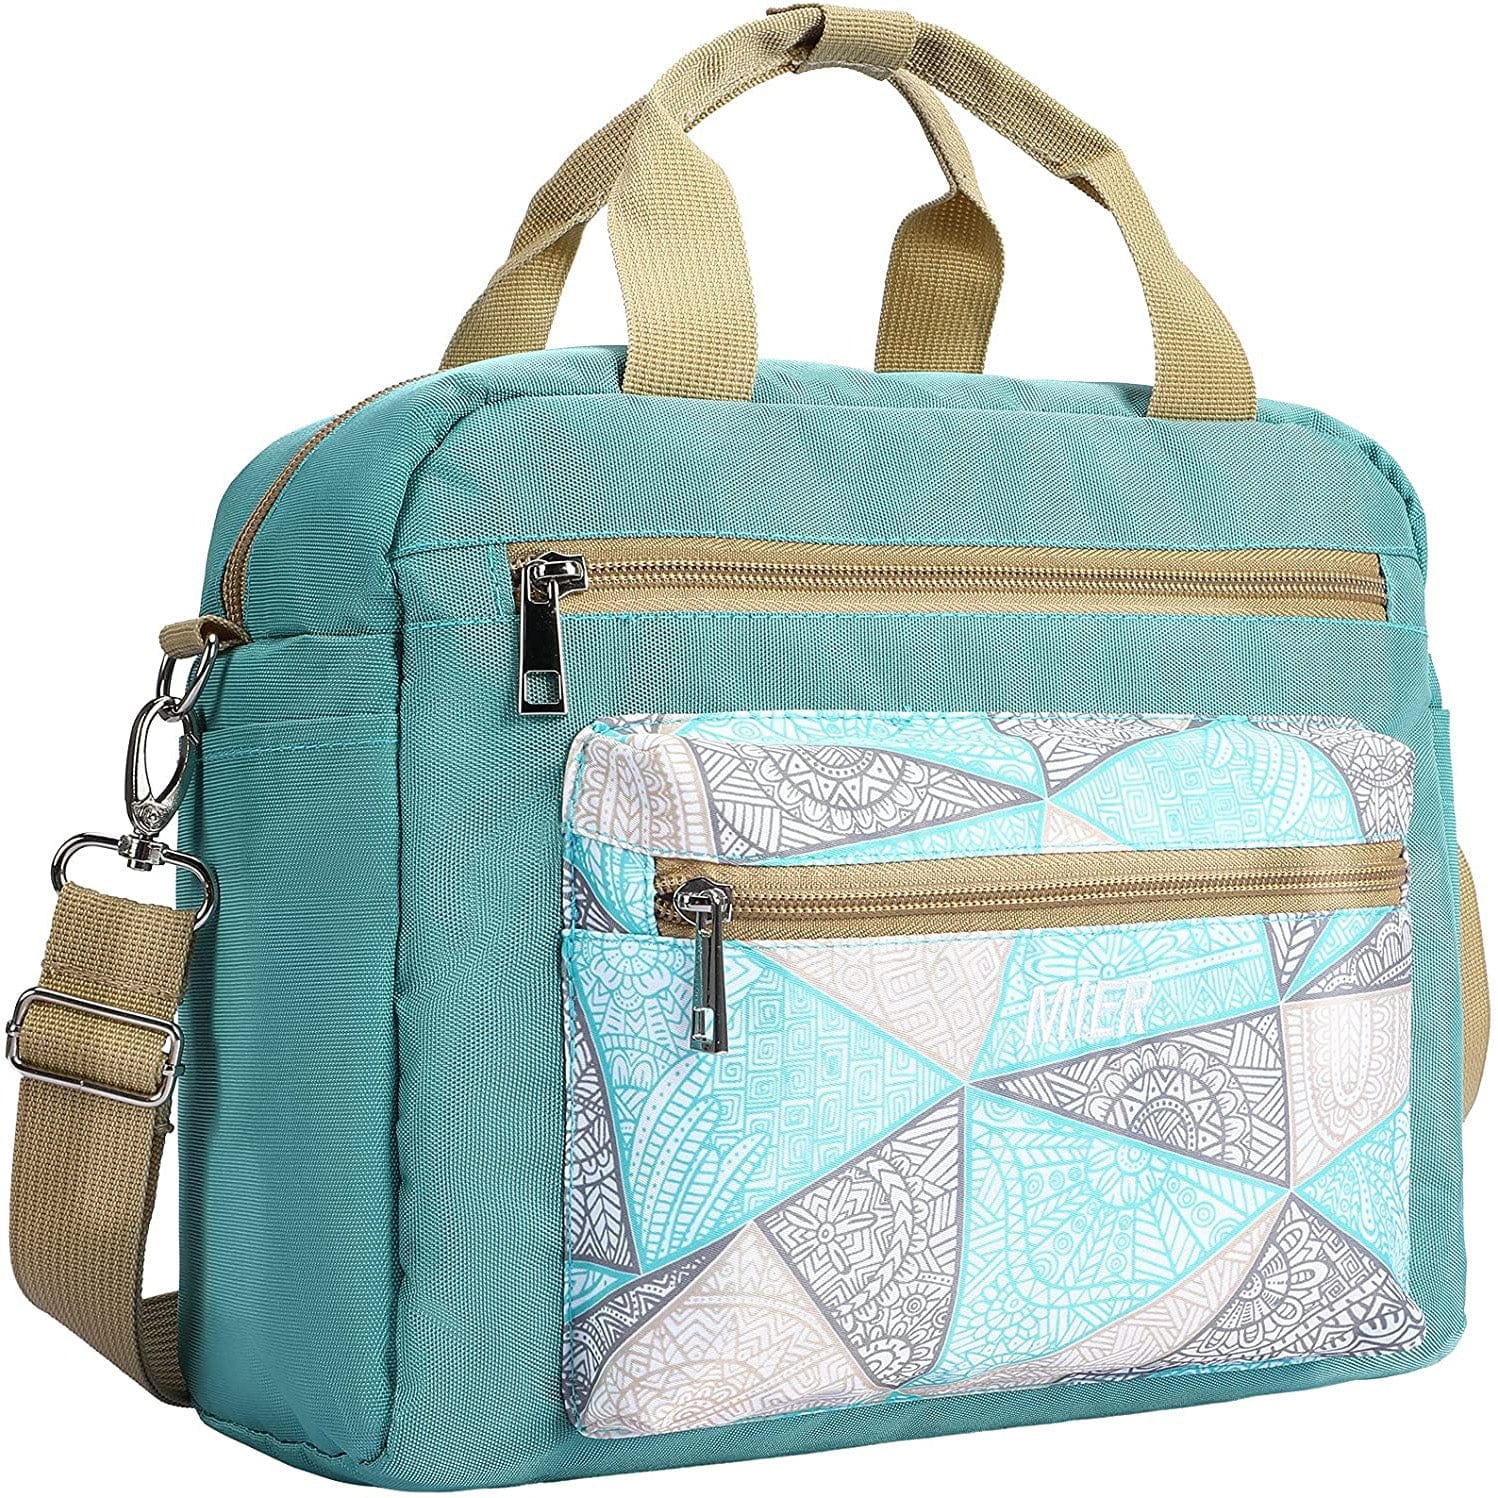 MIER Large Lunch Bags for Women Insulated Lunch Tote Bag, Lake Green / 16 Can